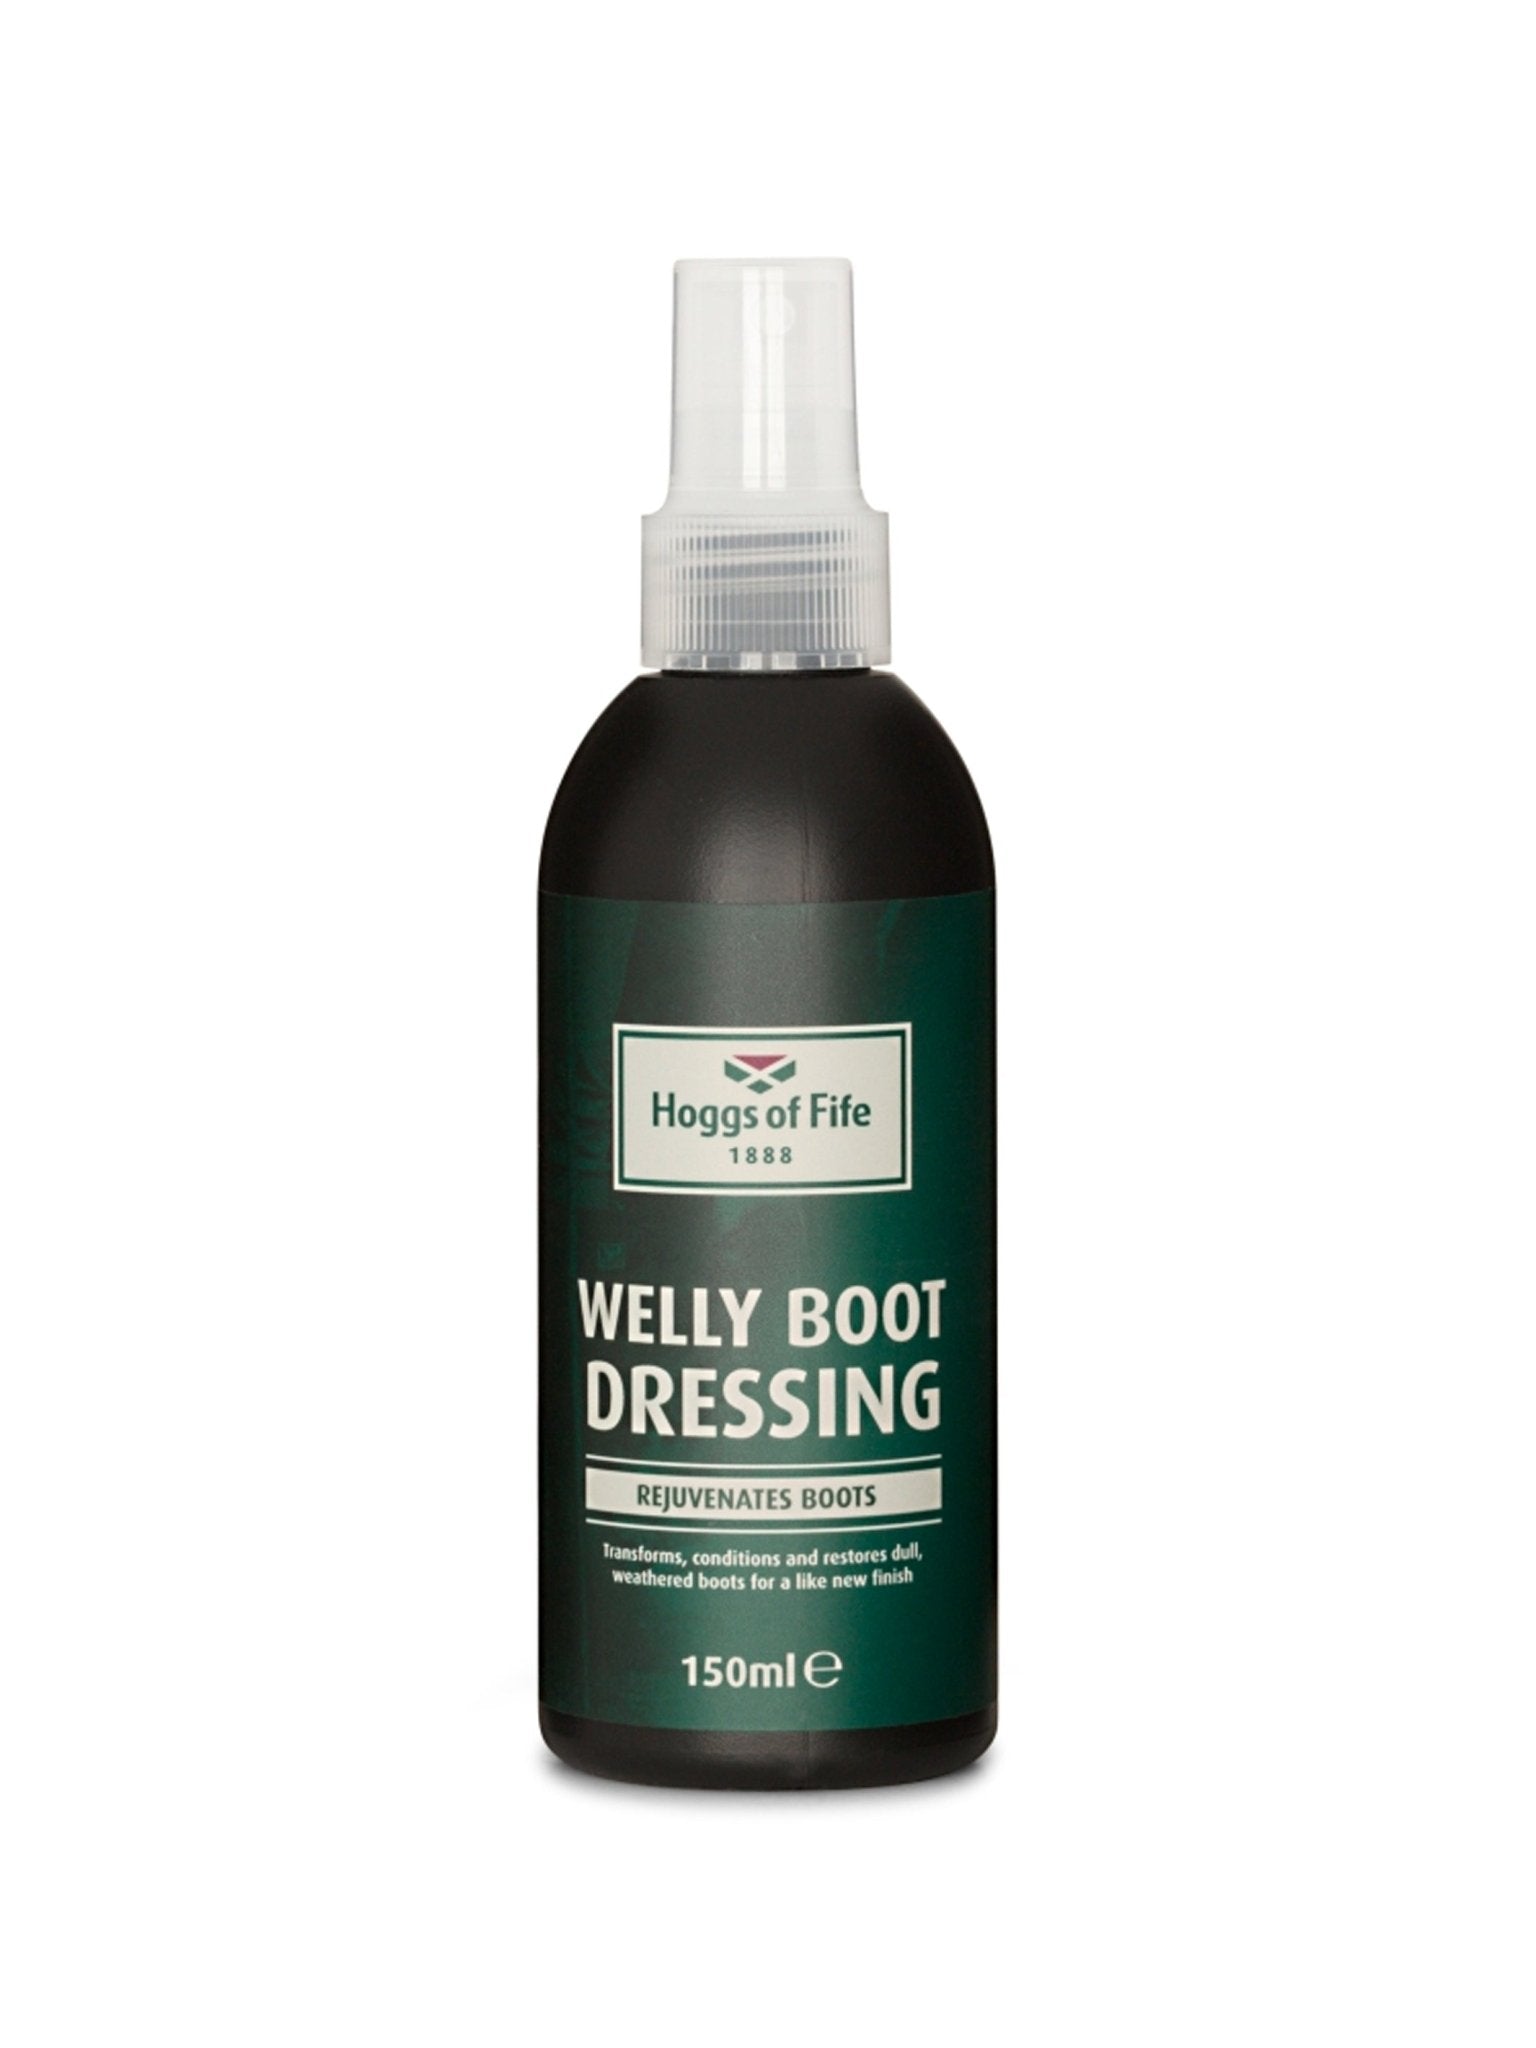 Hoggs of Fife Hoggs of Fife - Wellington Boot / Rubber Boot Dressing 150ml protection solution Shoe & Clothing Care